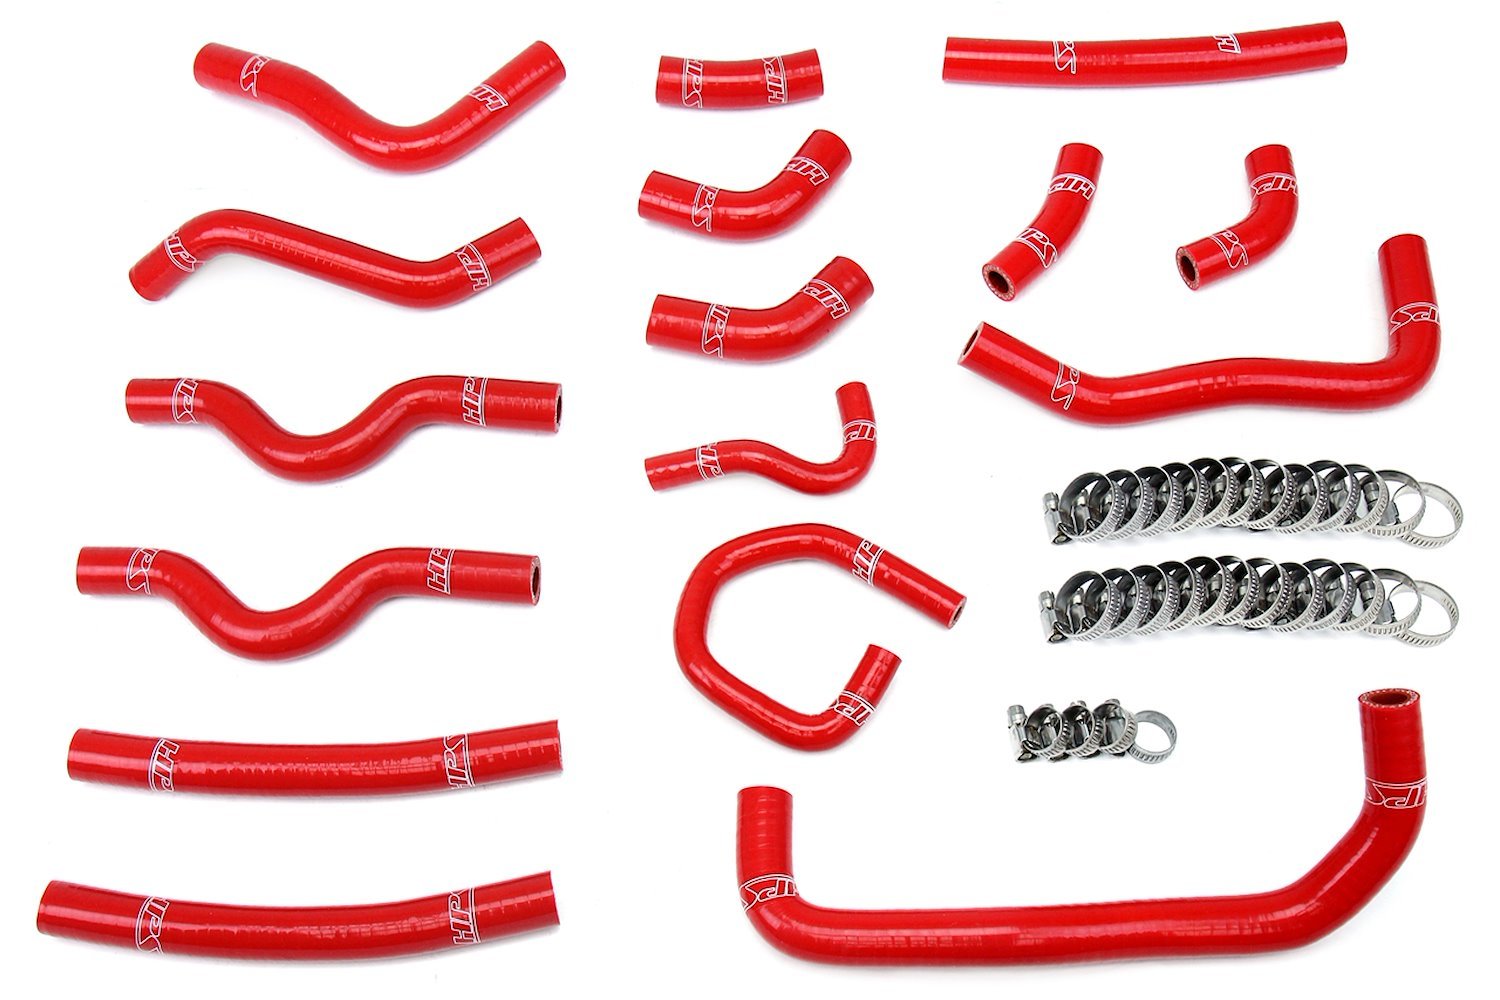 57-1913-RED Heater Hose Kit, High-Temp 3-Ply Reinforced Silicone, Replace OEM Rubber Heater Coolant Hoses